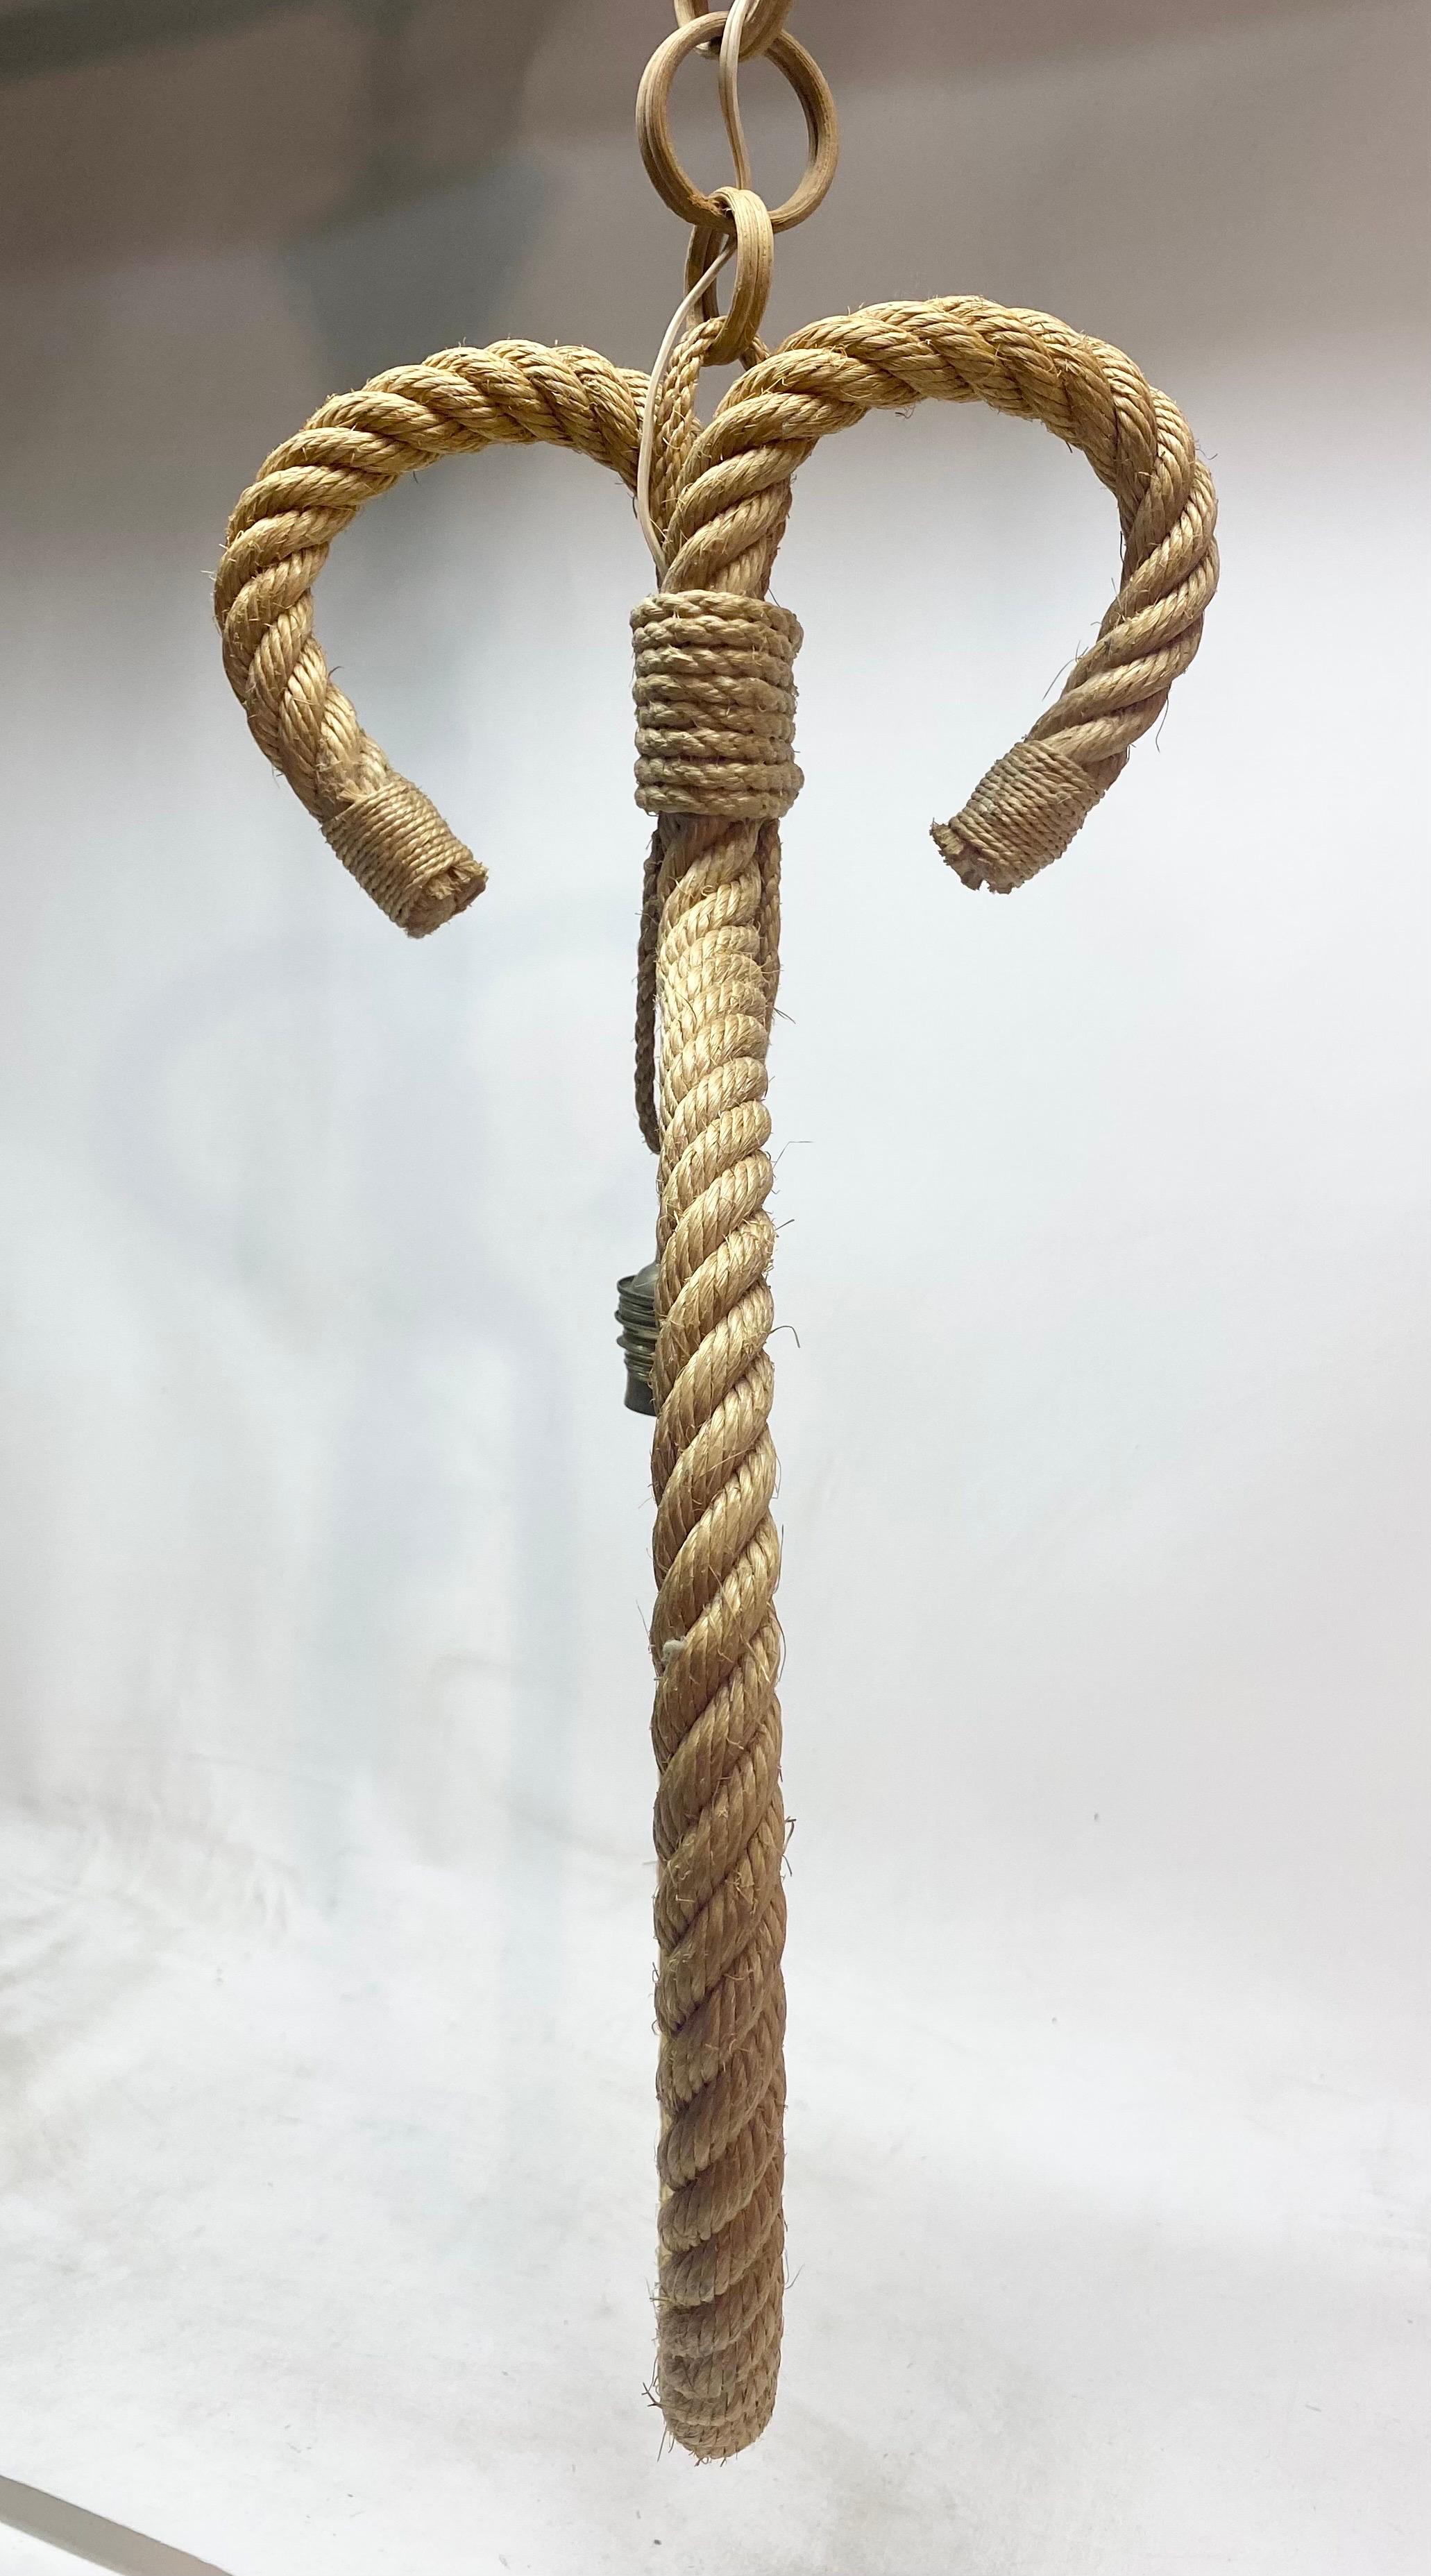 Audoux Minet Rope Pendant In Good Condition For Sale In East Hampton, NY